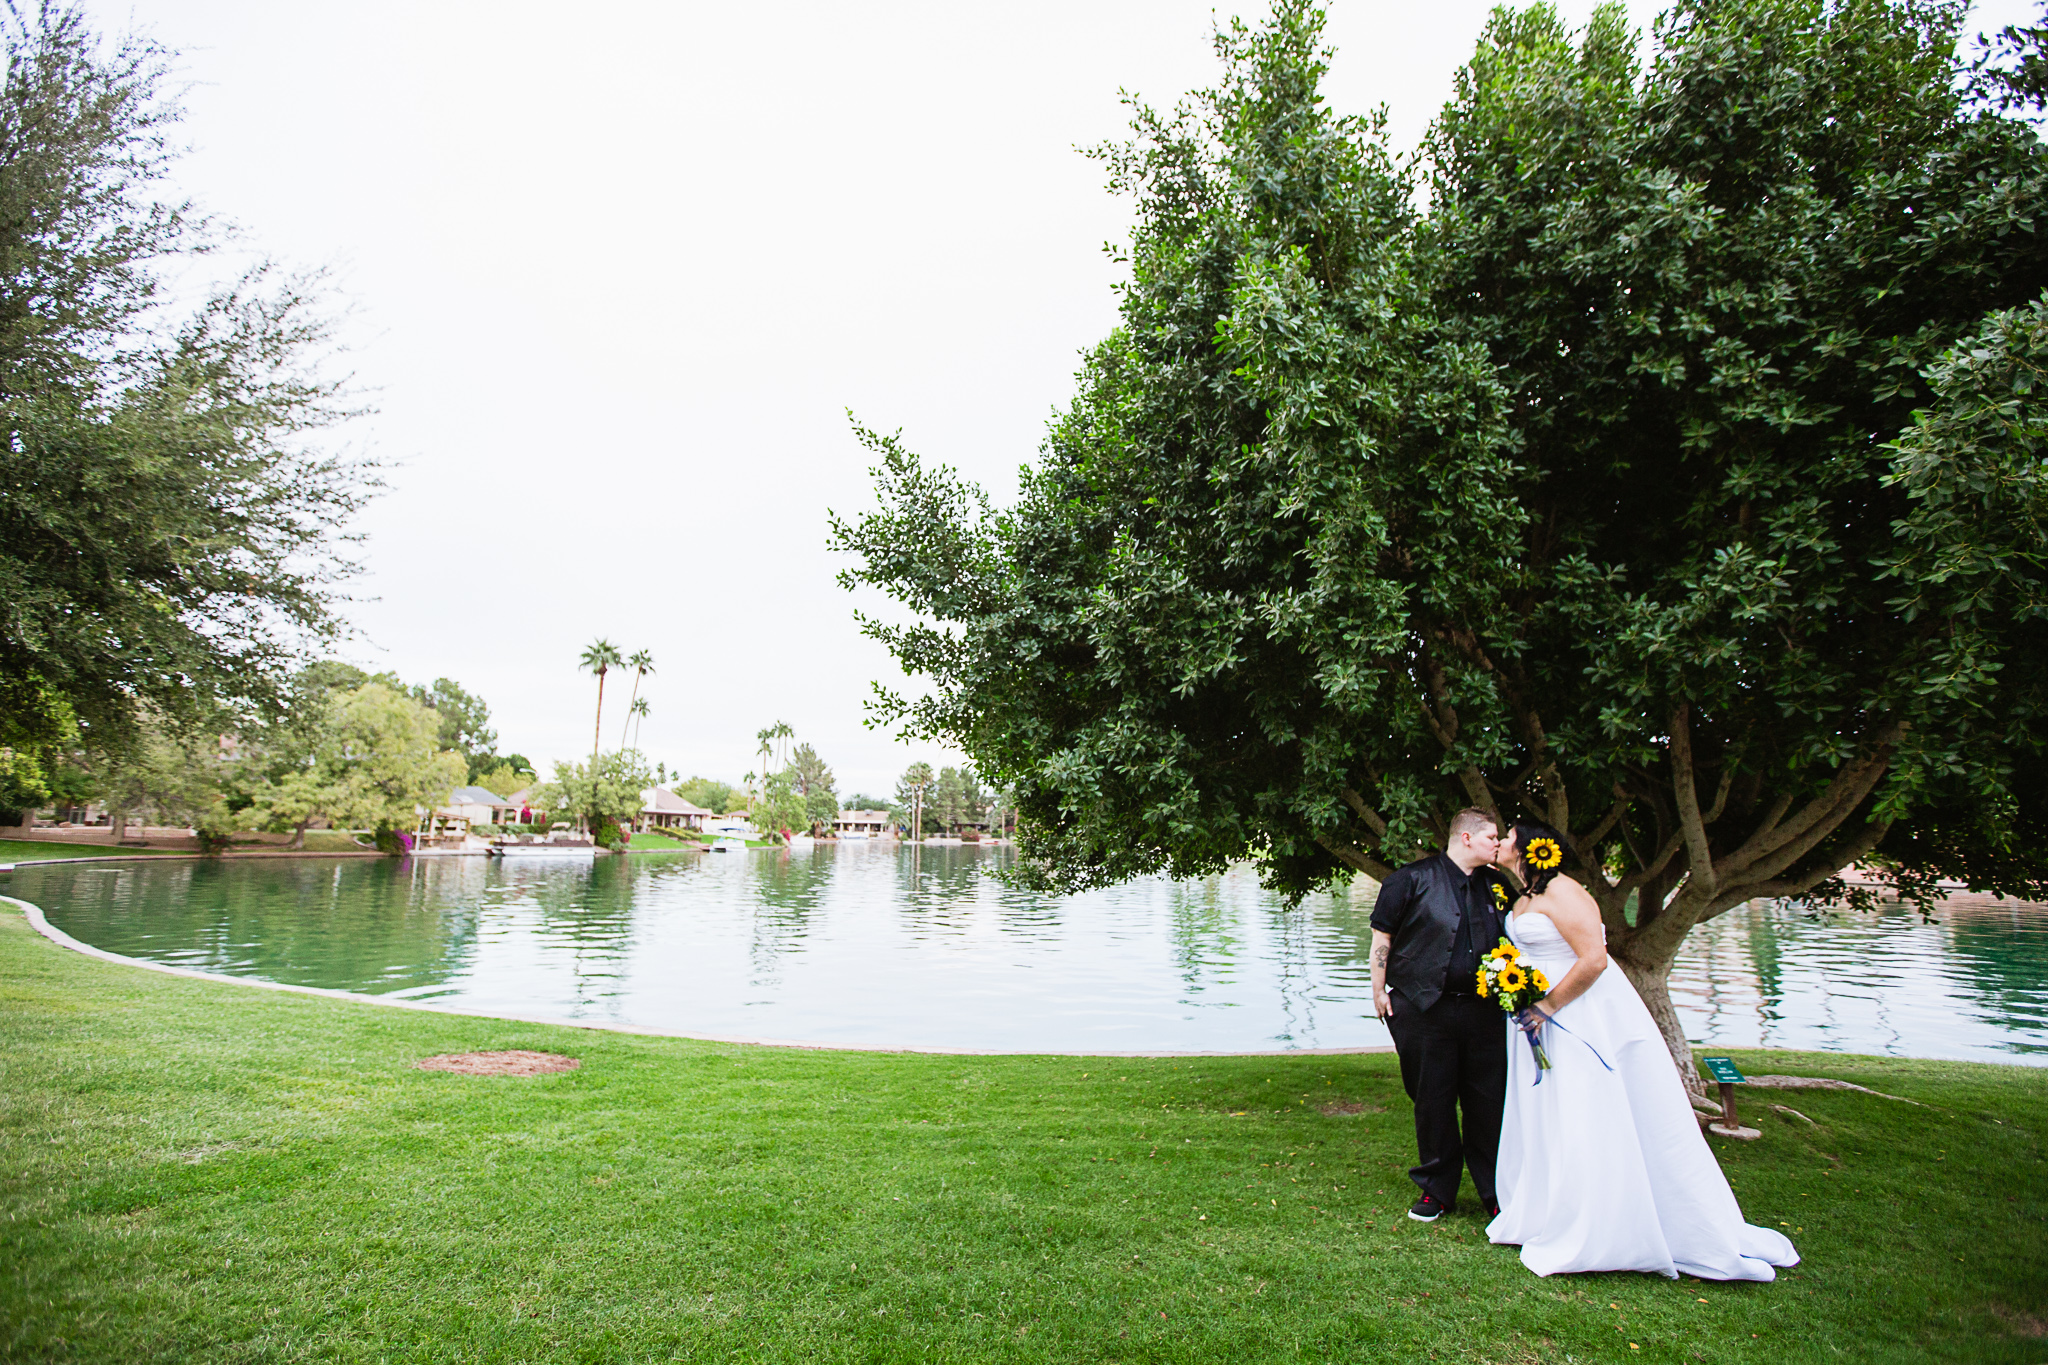 Same sex couple kissing in front of a tree and small lake in a park on their wedding day by Phoenix wedding photographers PMA Photography.